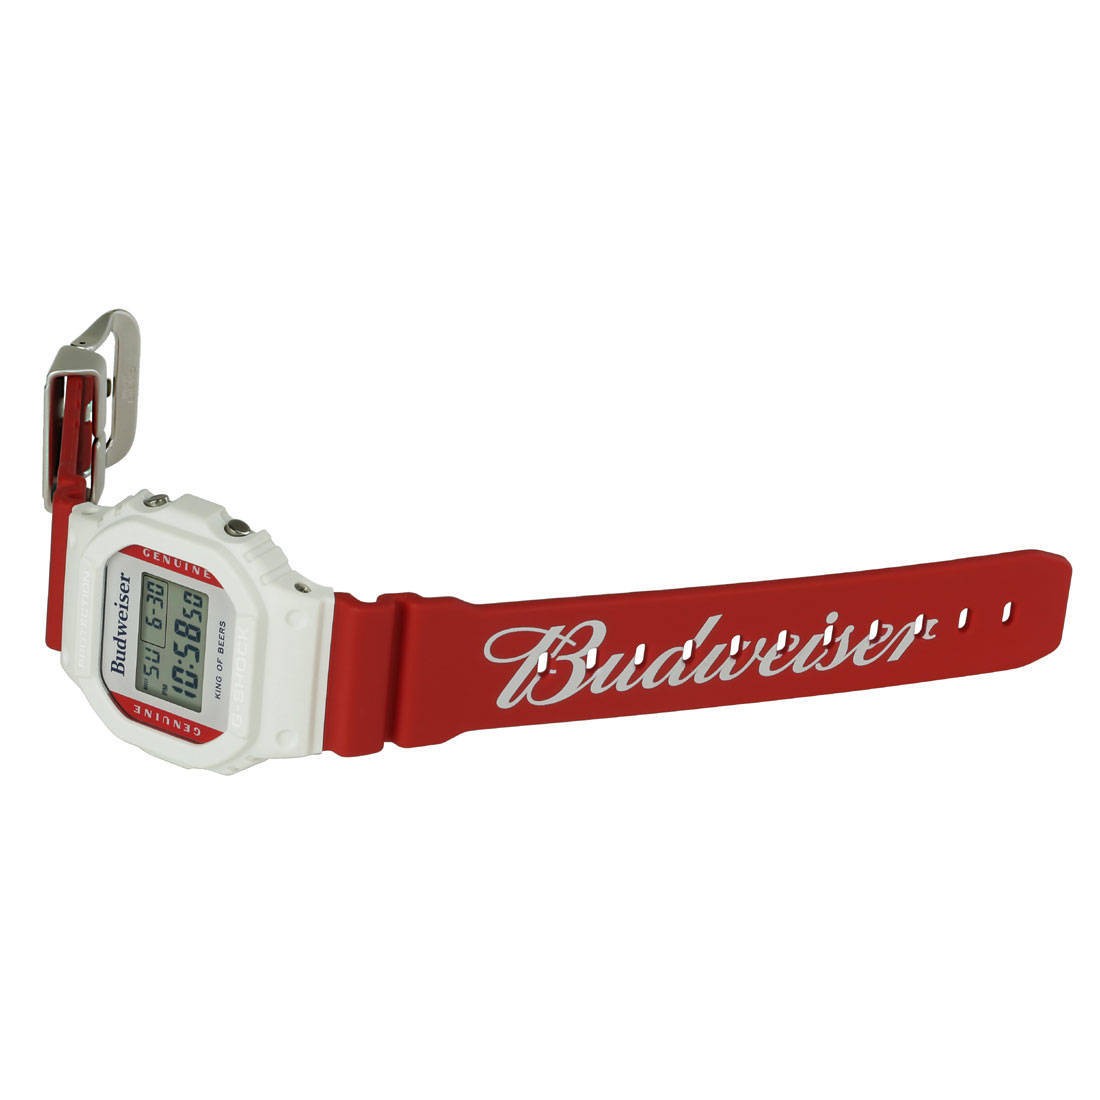 INTRODUCING: The G-Shock x Budweiser Limited Edition